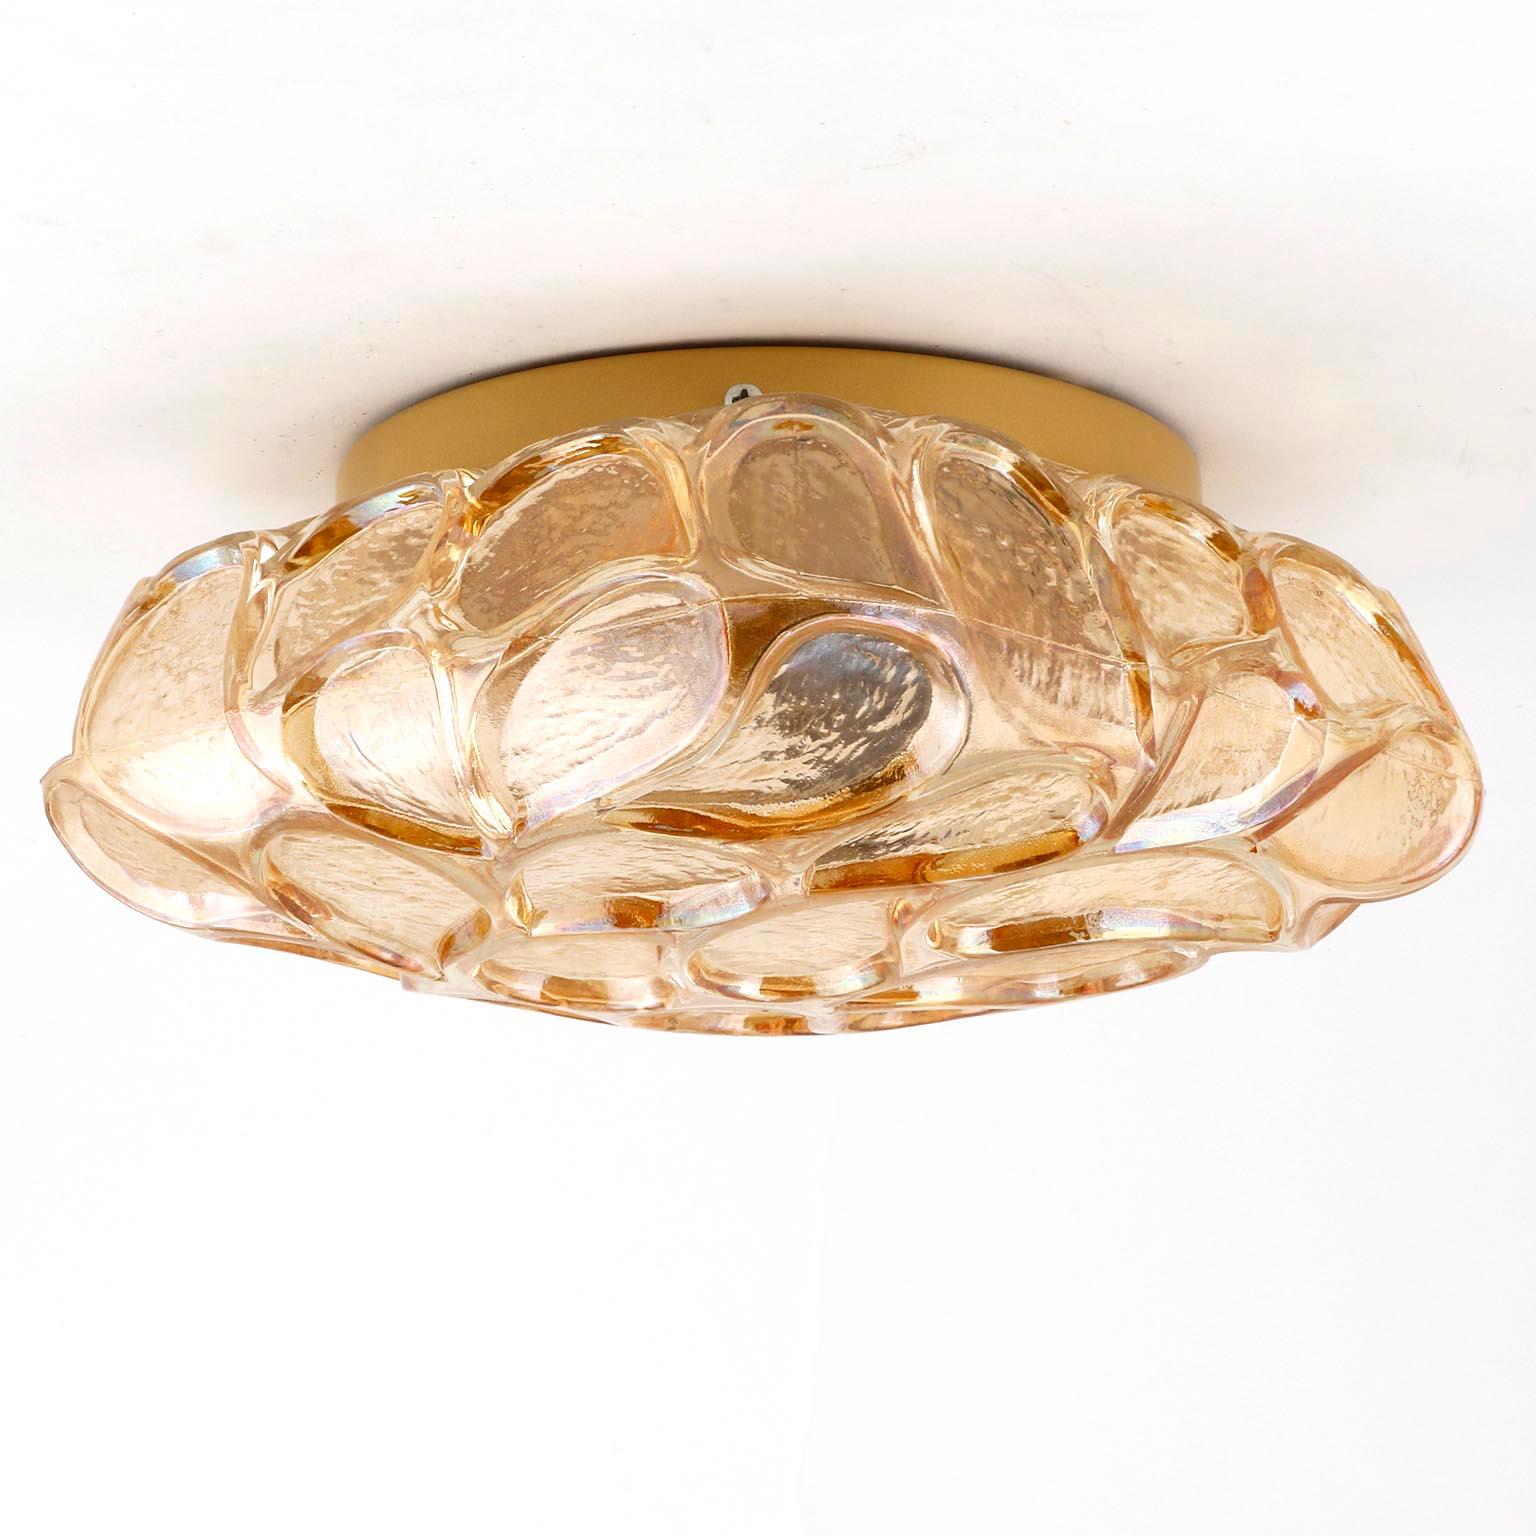 Painted Flush Mount Light or Sconce, Amber Tone Glass, 1970